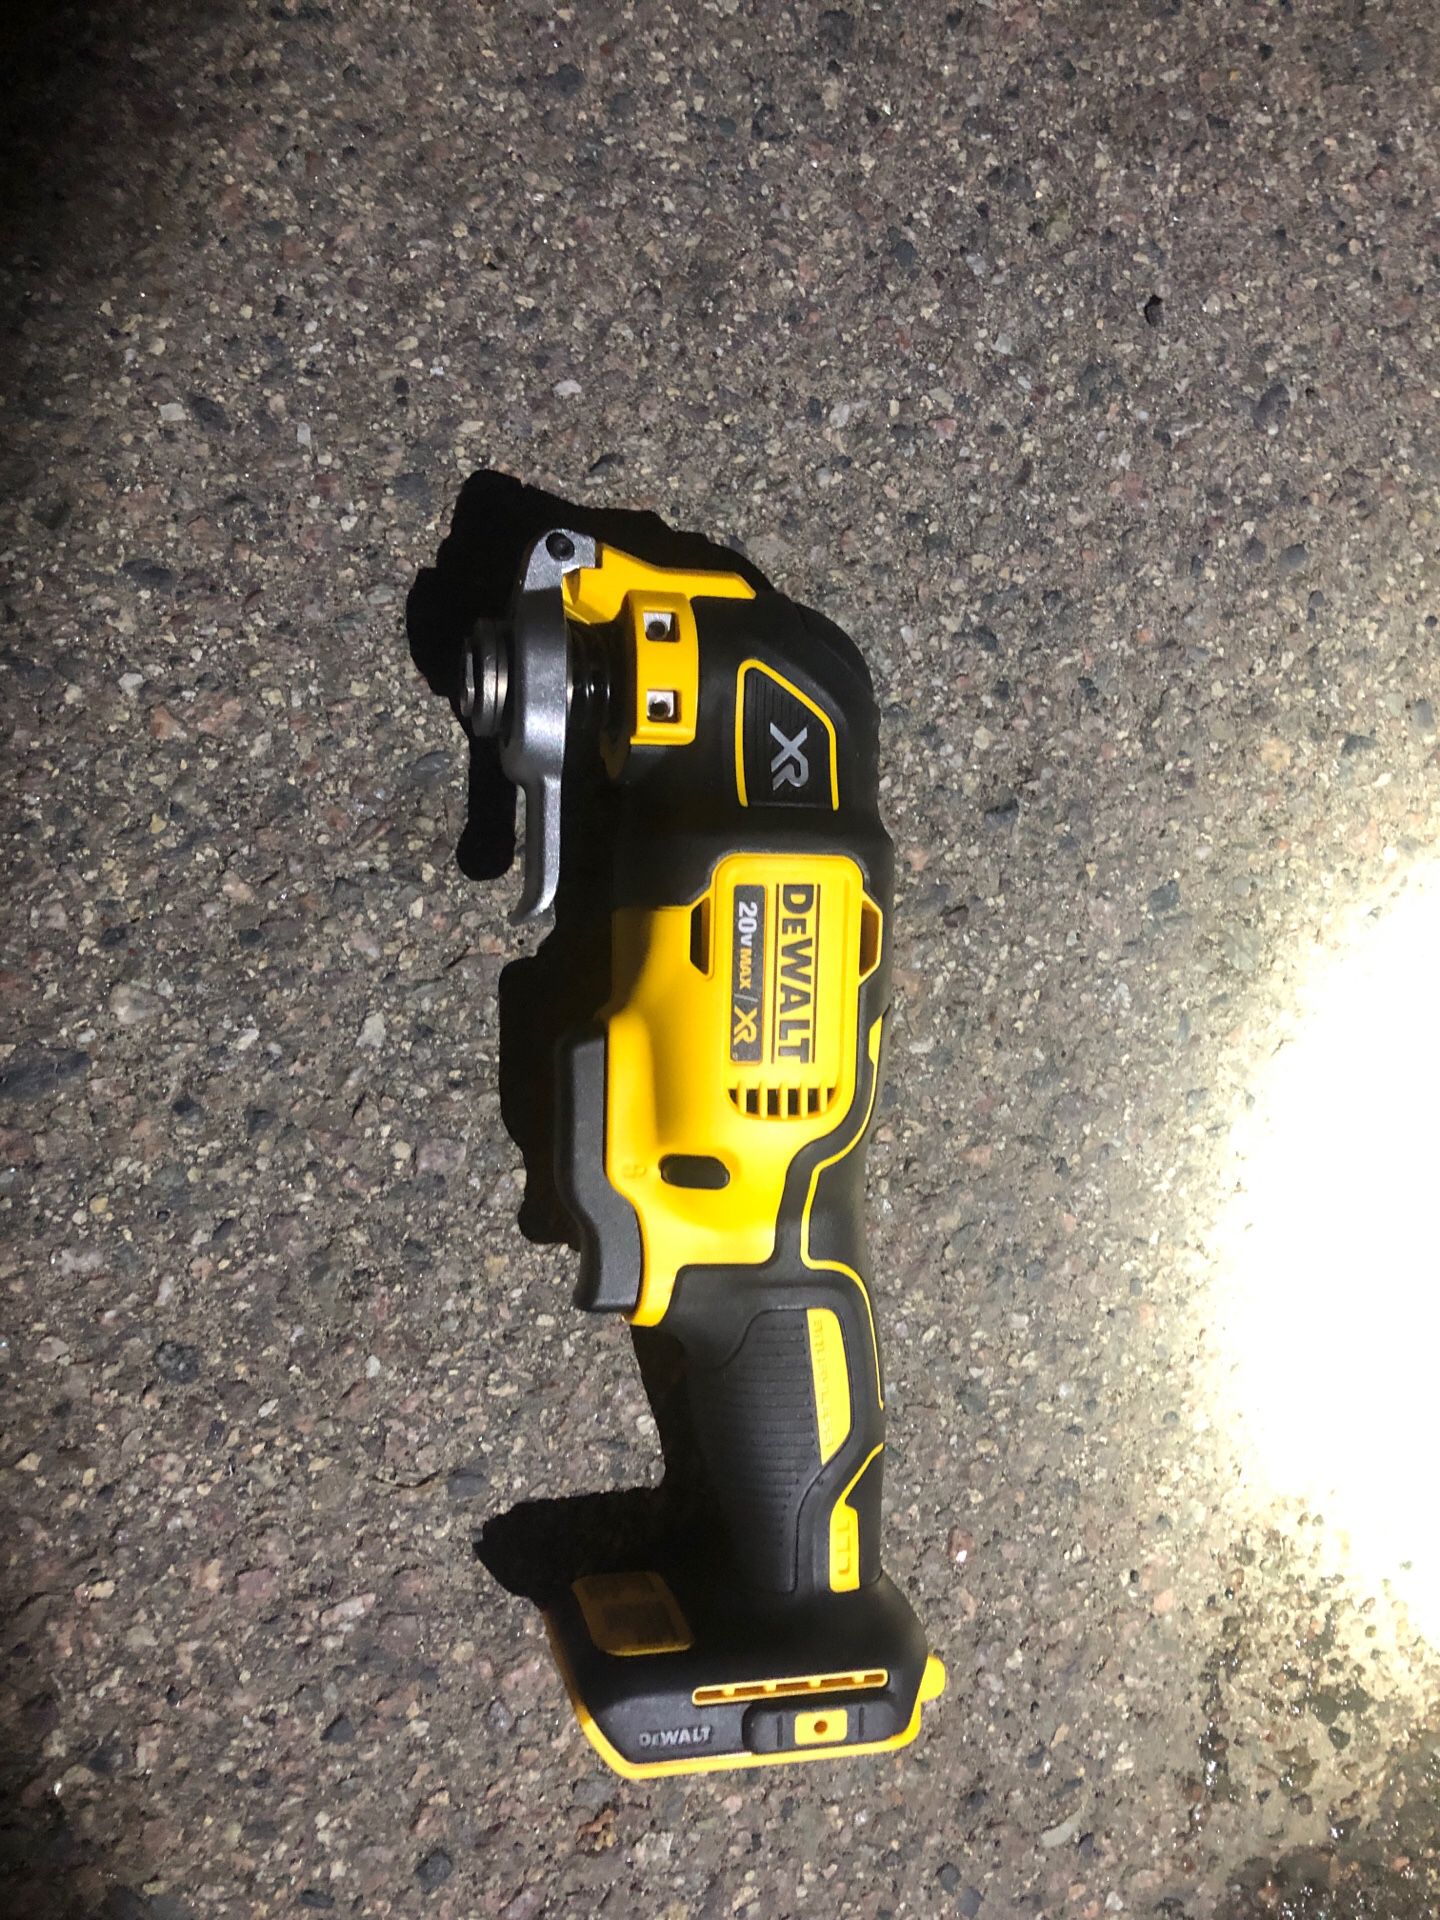 Dewalt power tool set with box willing that negotiate. Comes with 3 batteries .